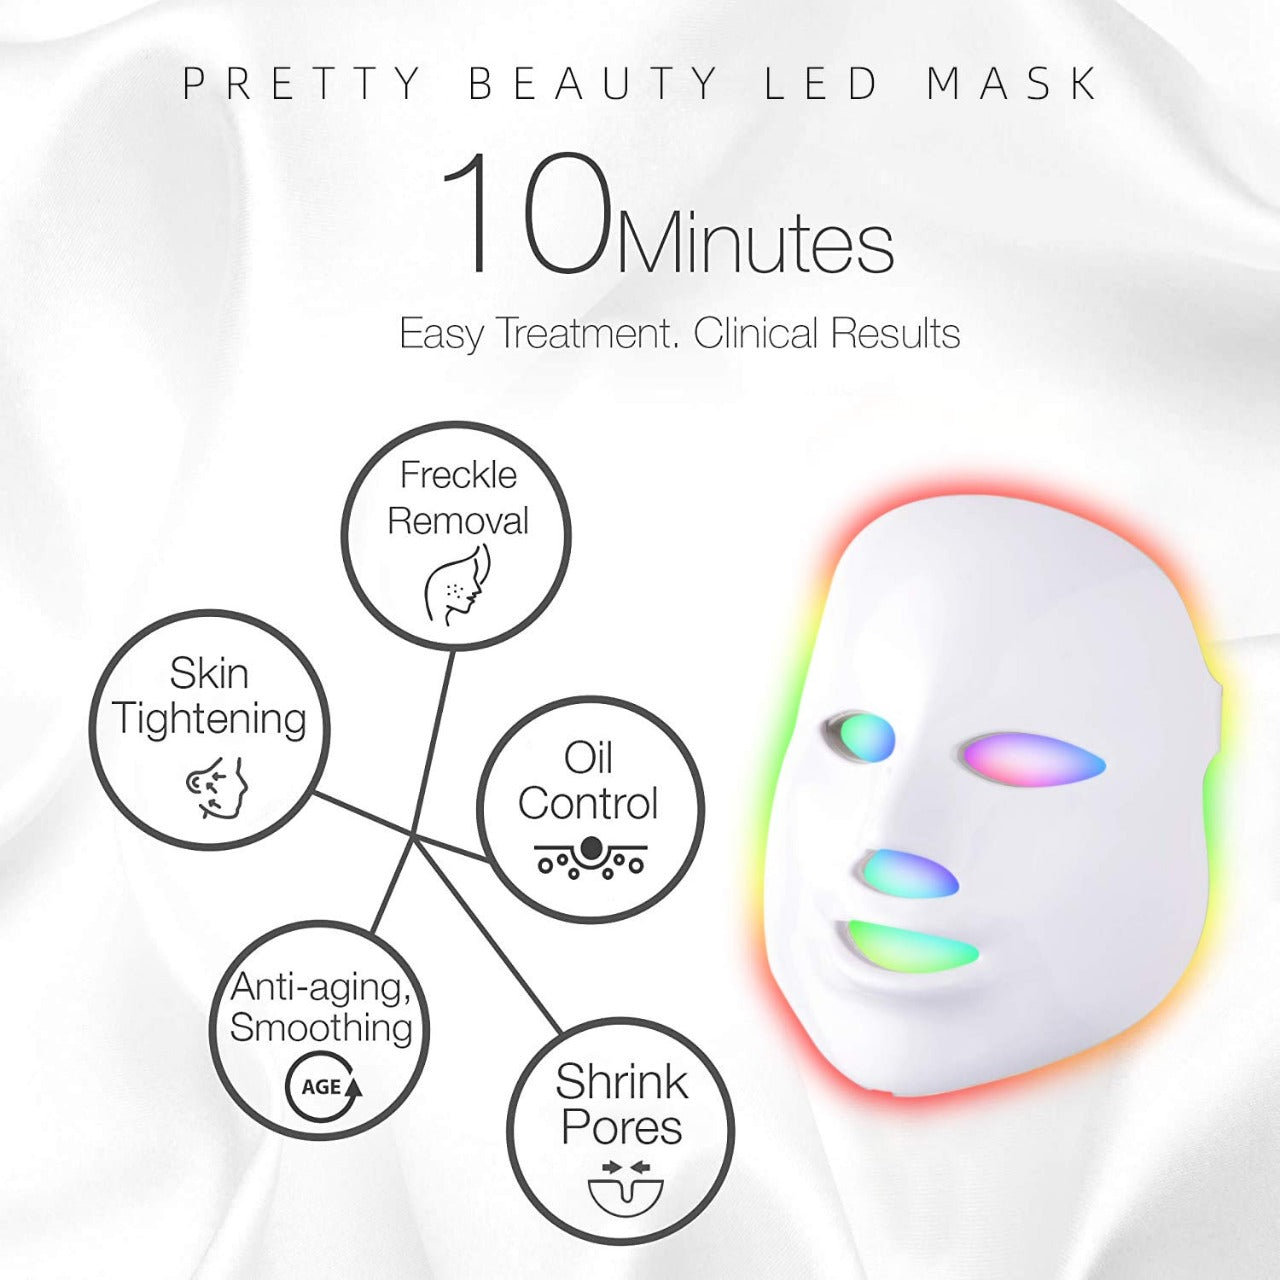 LED FACE MASK FOR LIGHT THERAPY 7 Color LED Mask Photon Light Skin Rejuvenation Therapy